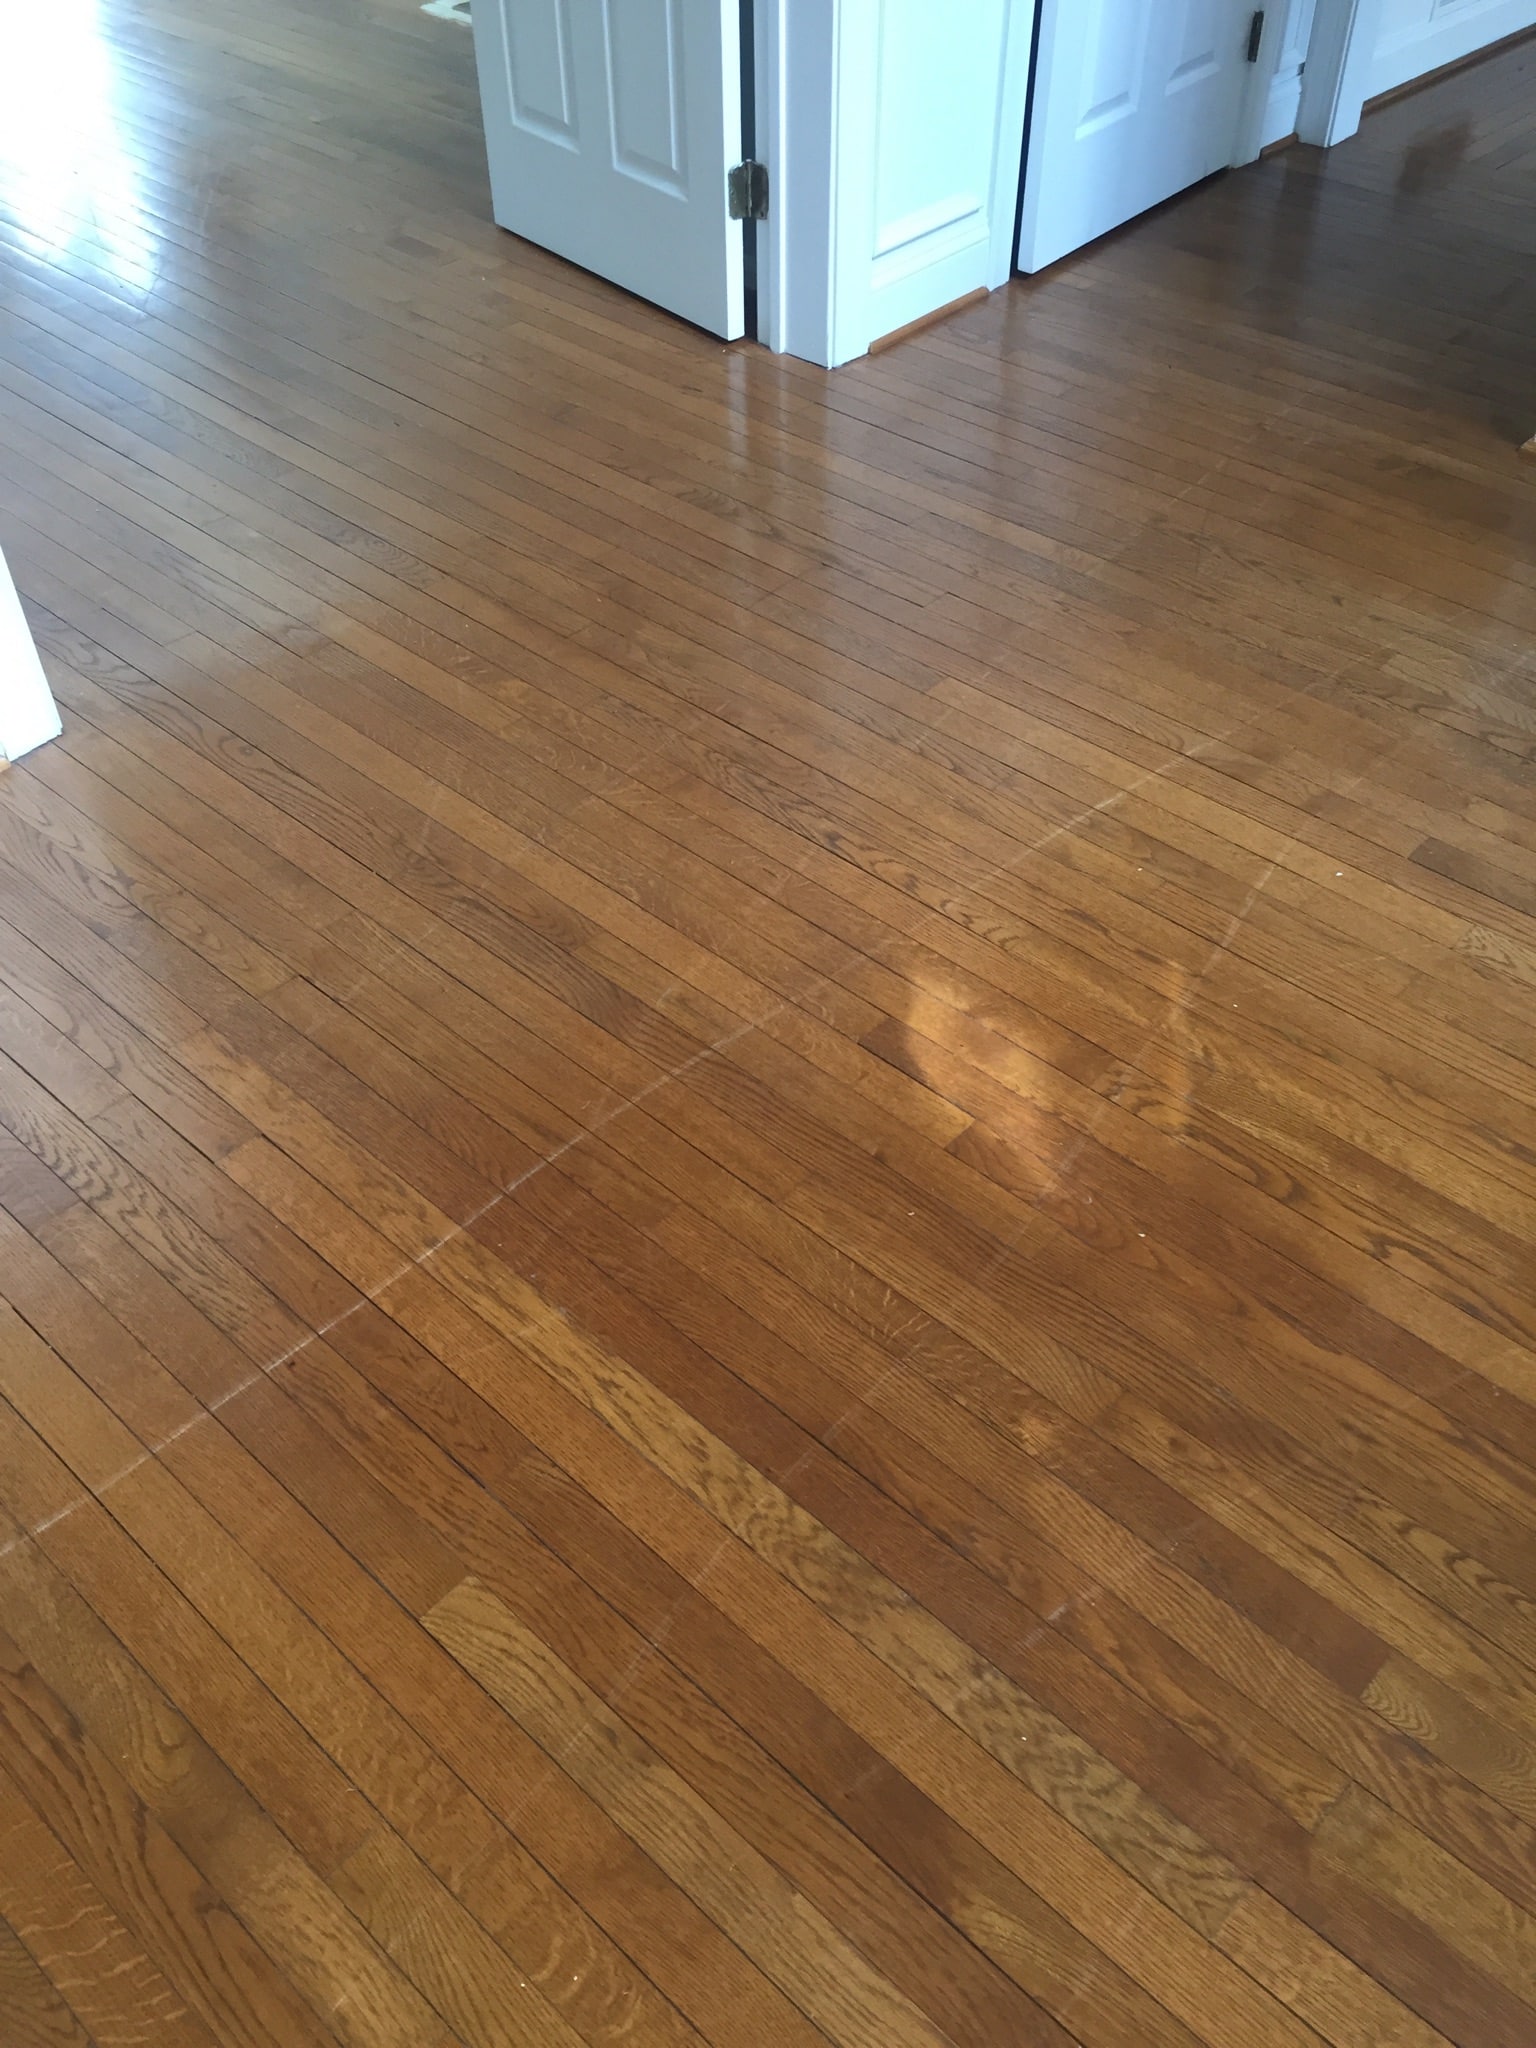 Hardwood Flooring with scratches